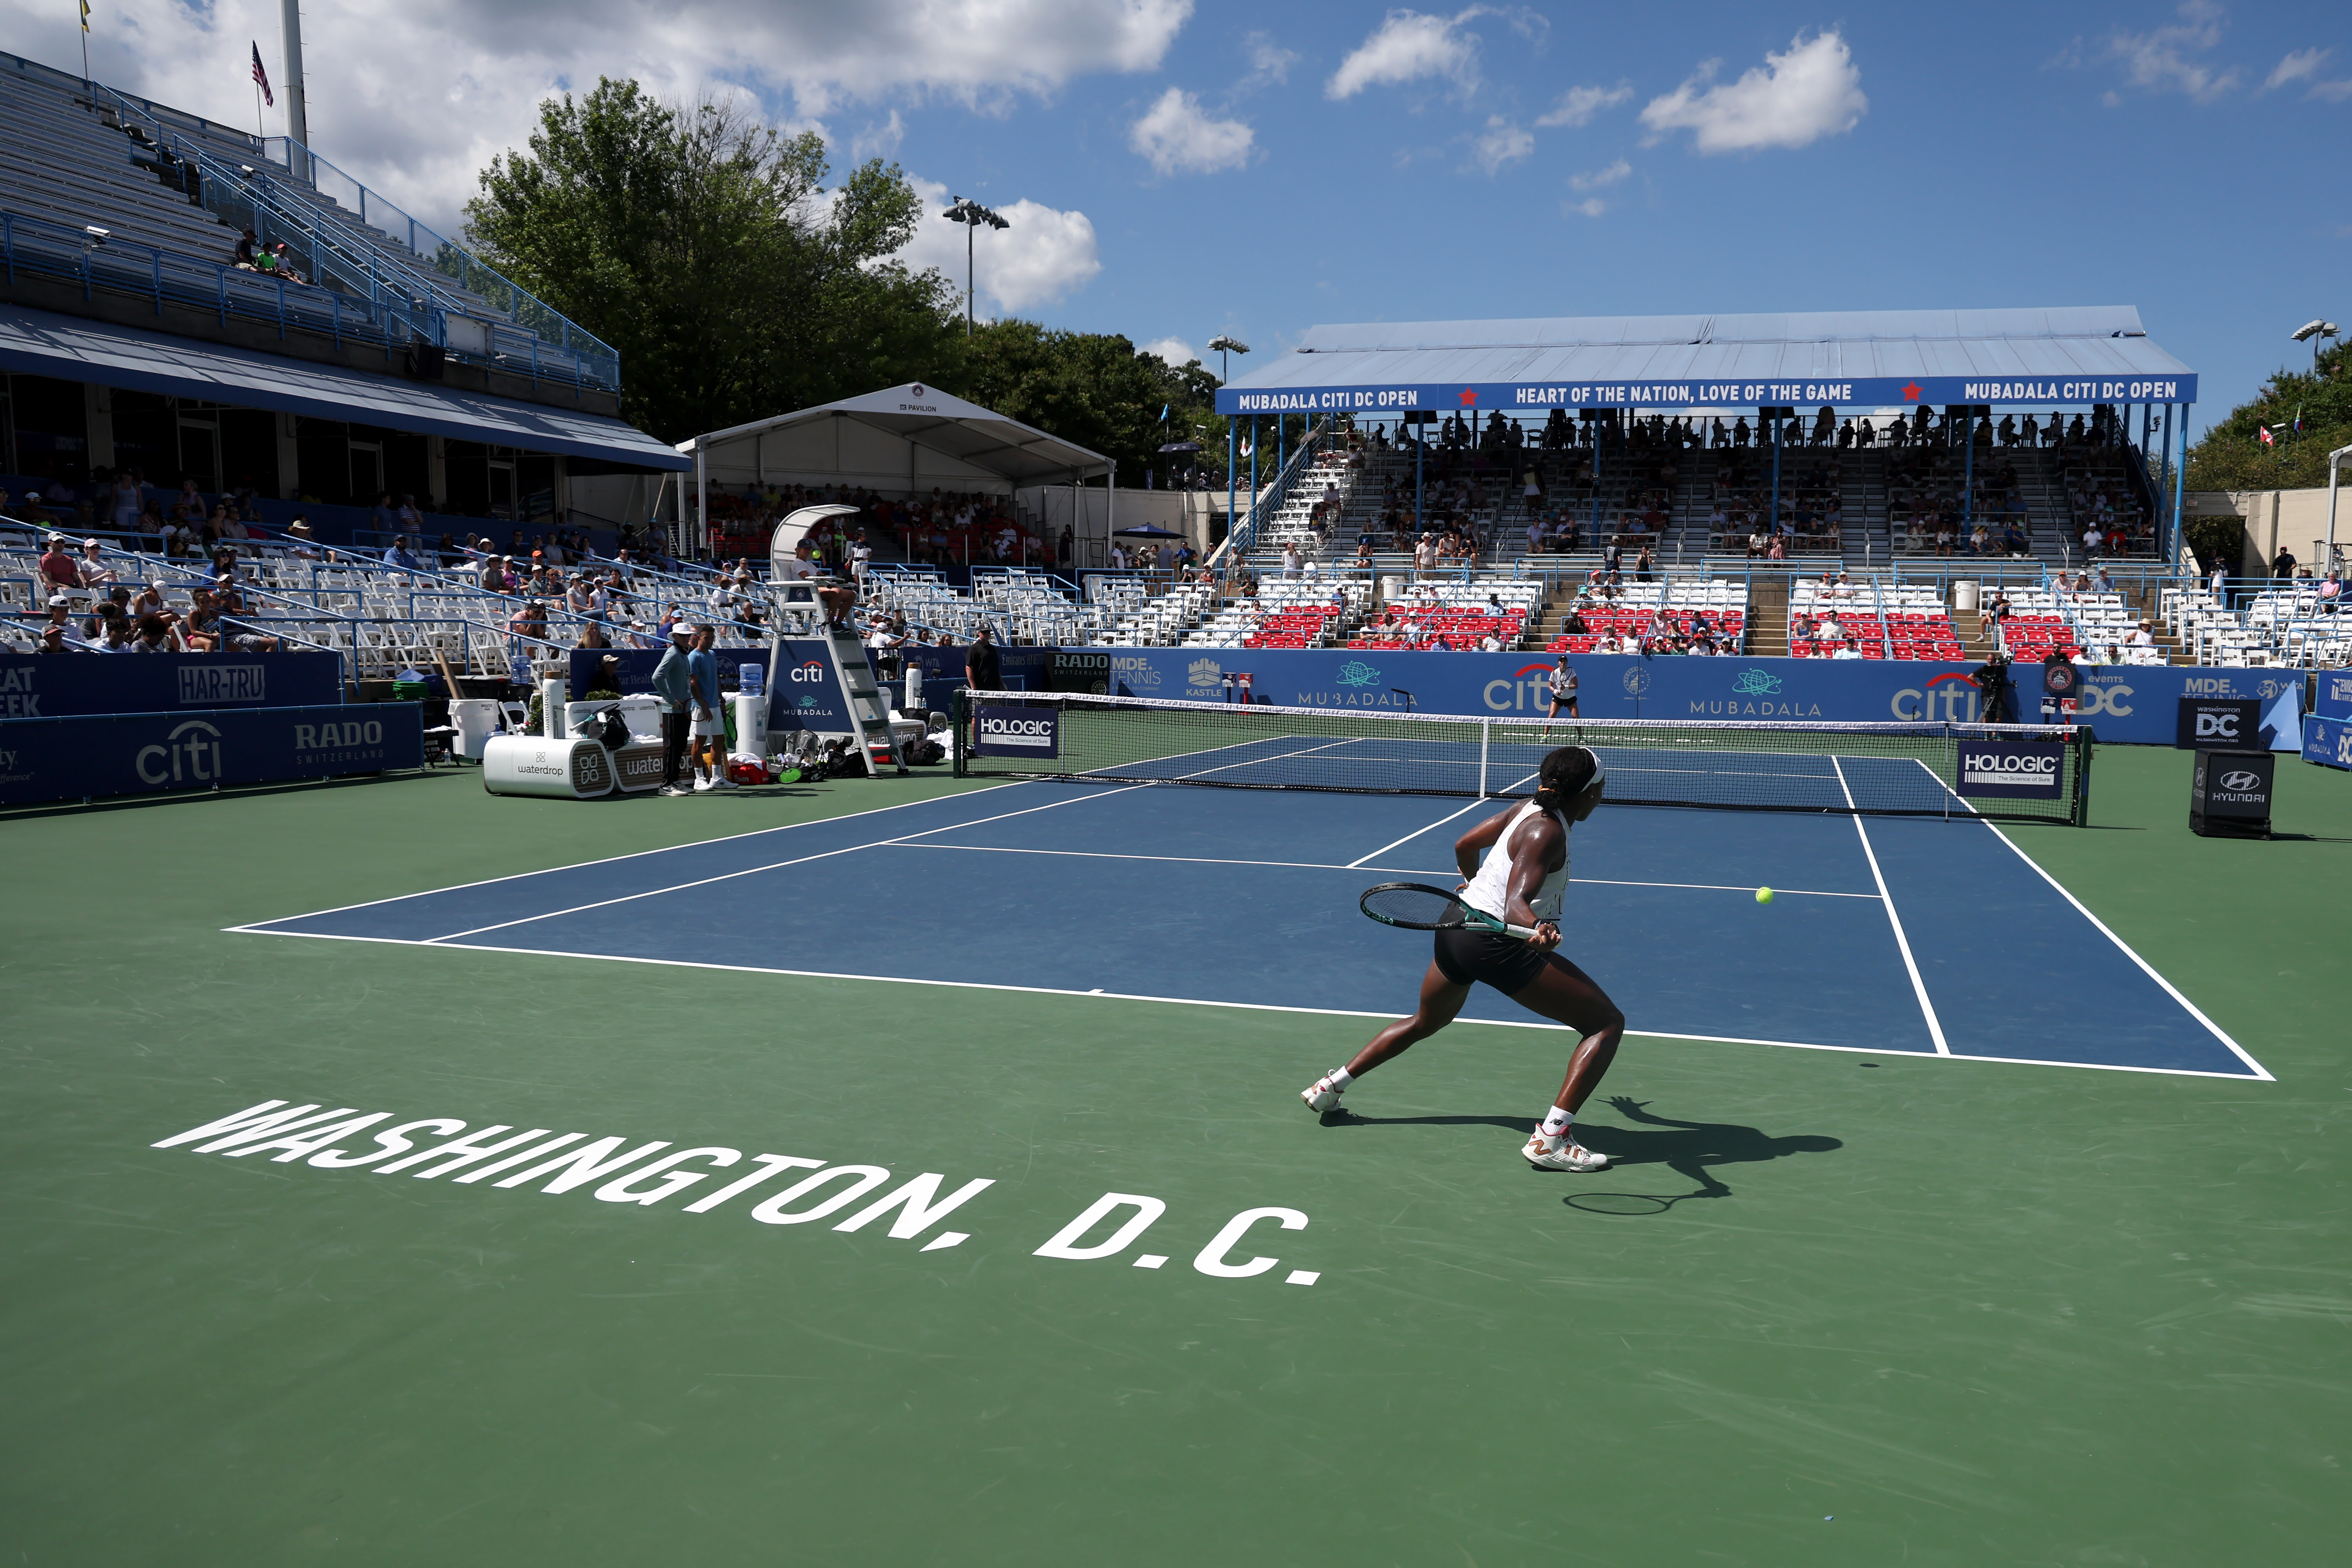 Washington DC tournament offers equal status for women and men, but unequal prize money